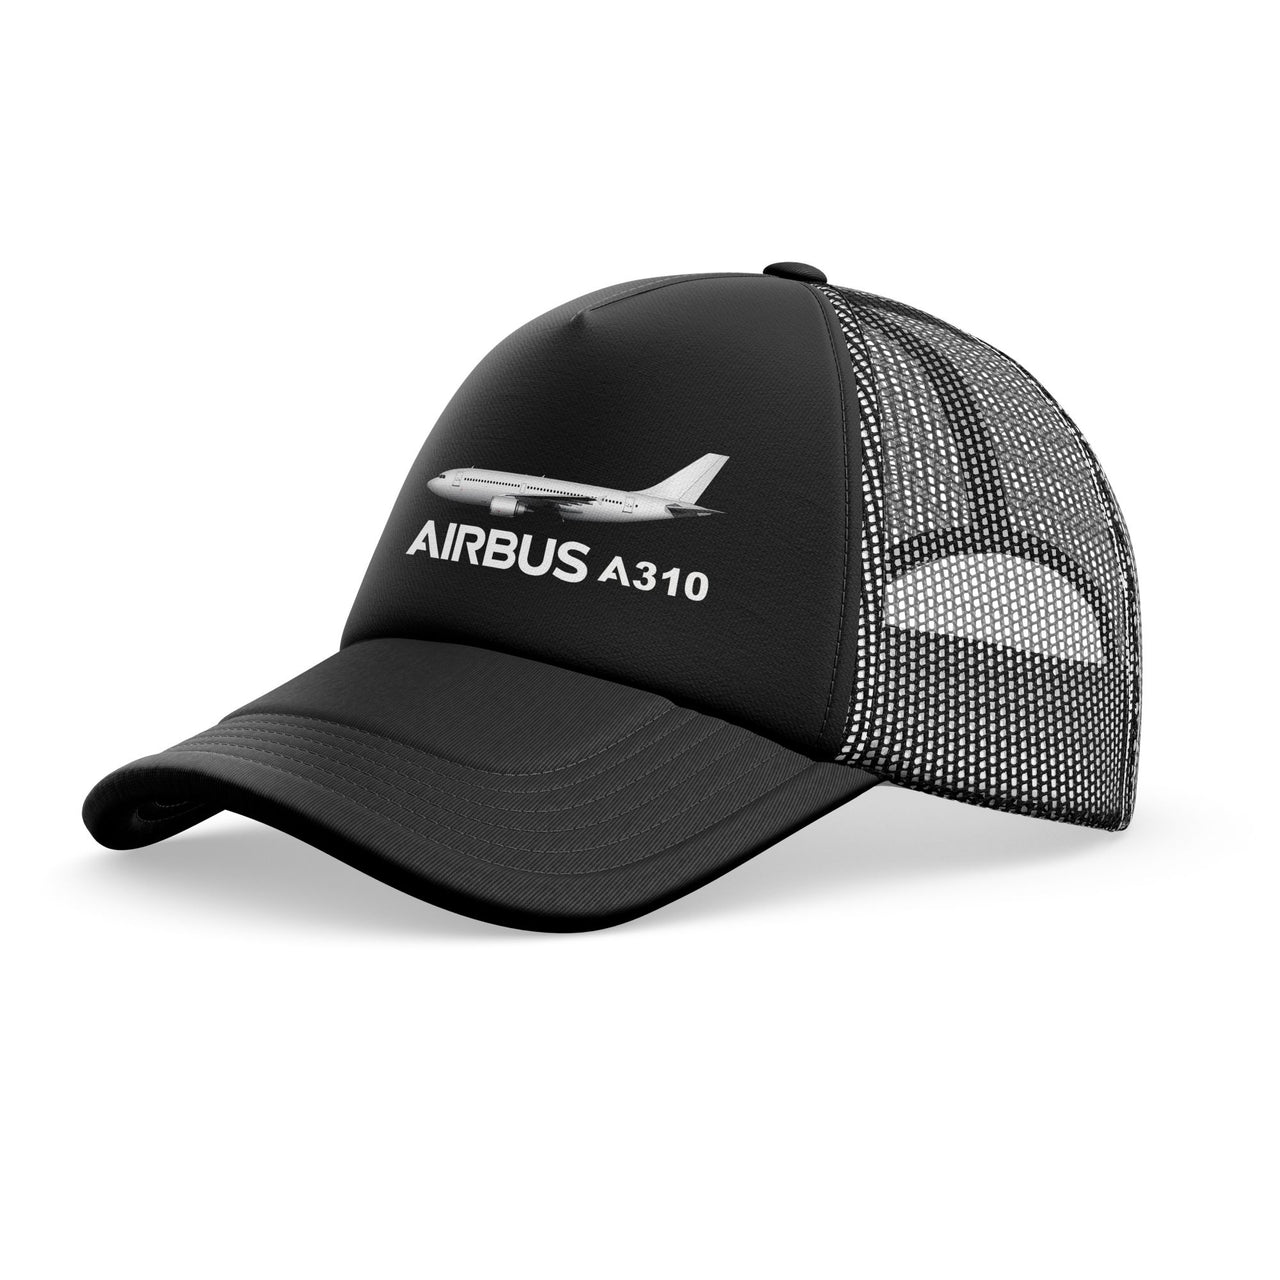 The Airbus A310 Designed Trucker Caps & Hats